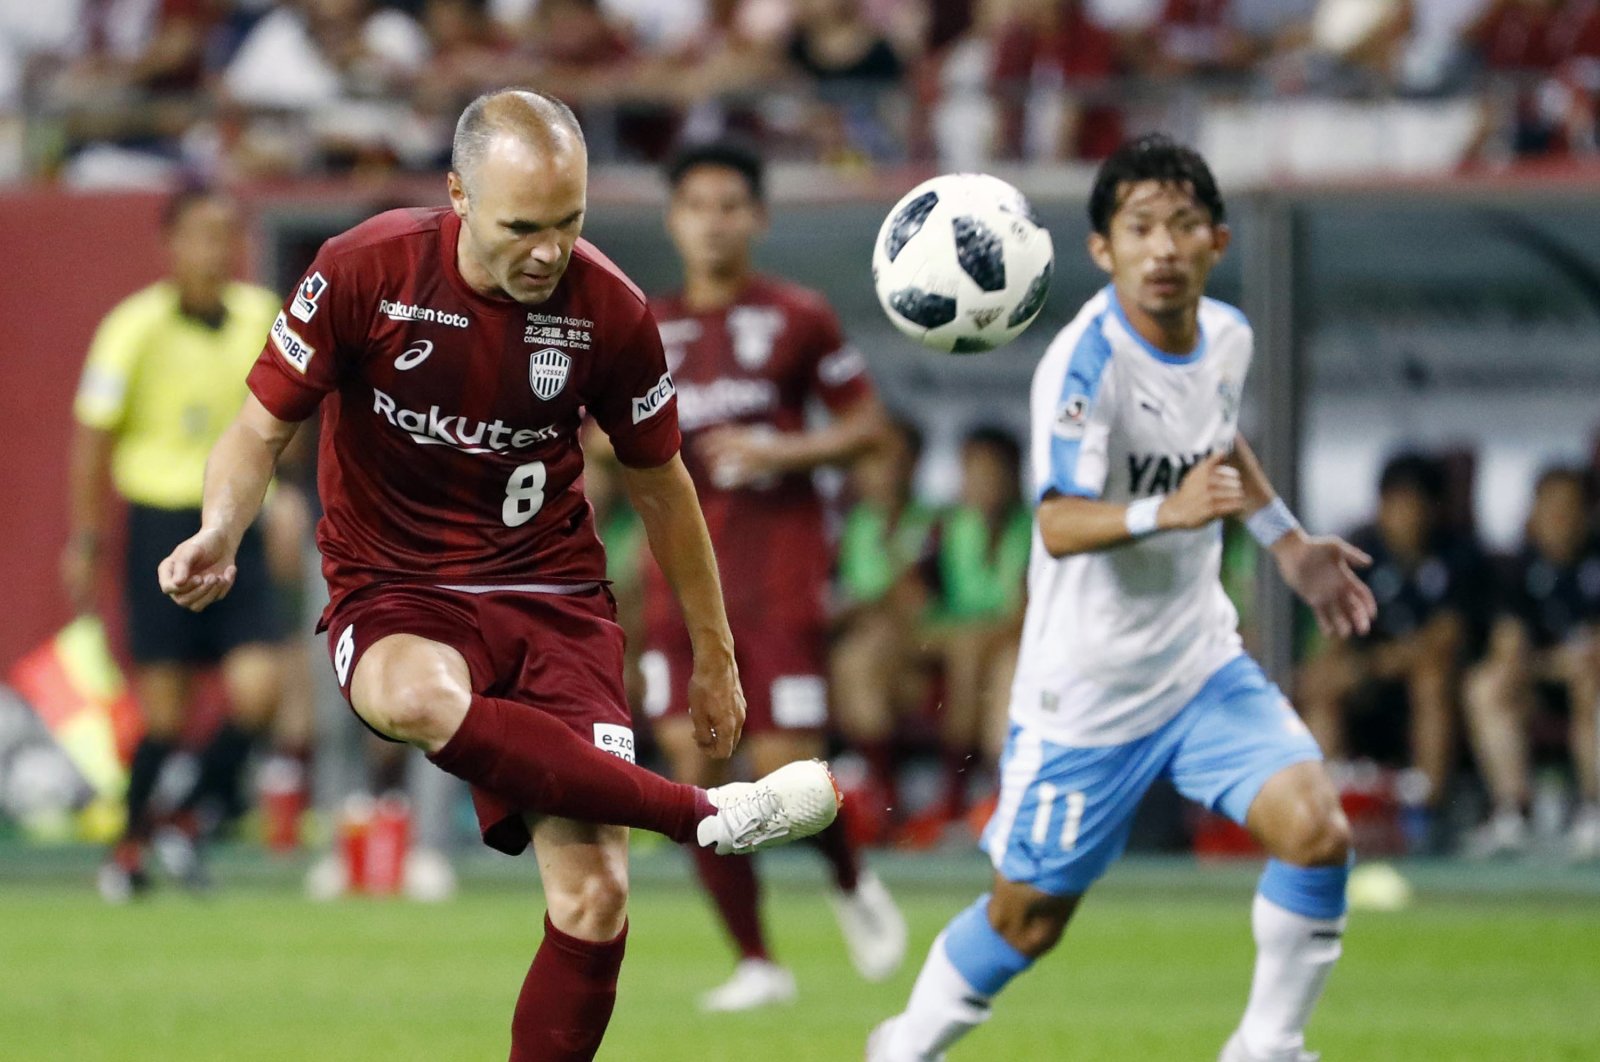 Andres Iniesta controls the ball during a match against Jubil Iwata, in Kobe, Japan, Saturday, August 11, 2018. (AP Photo) 